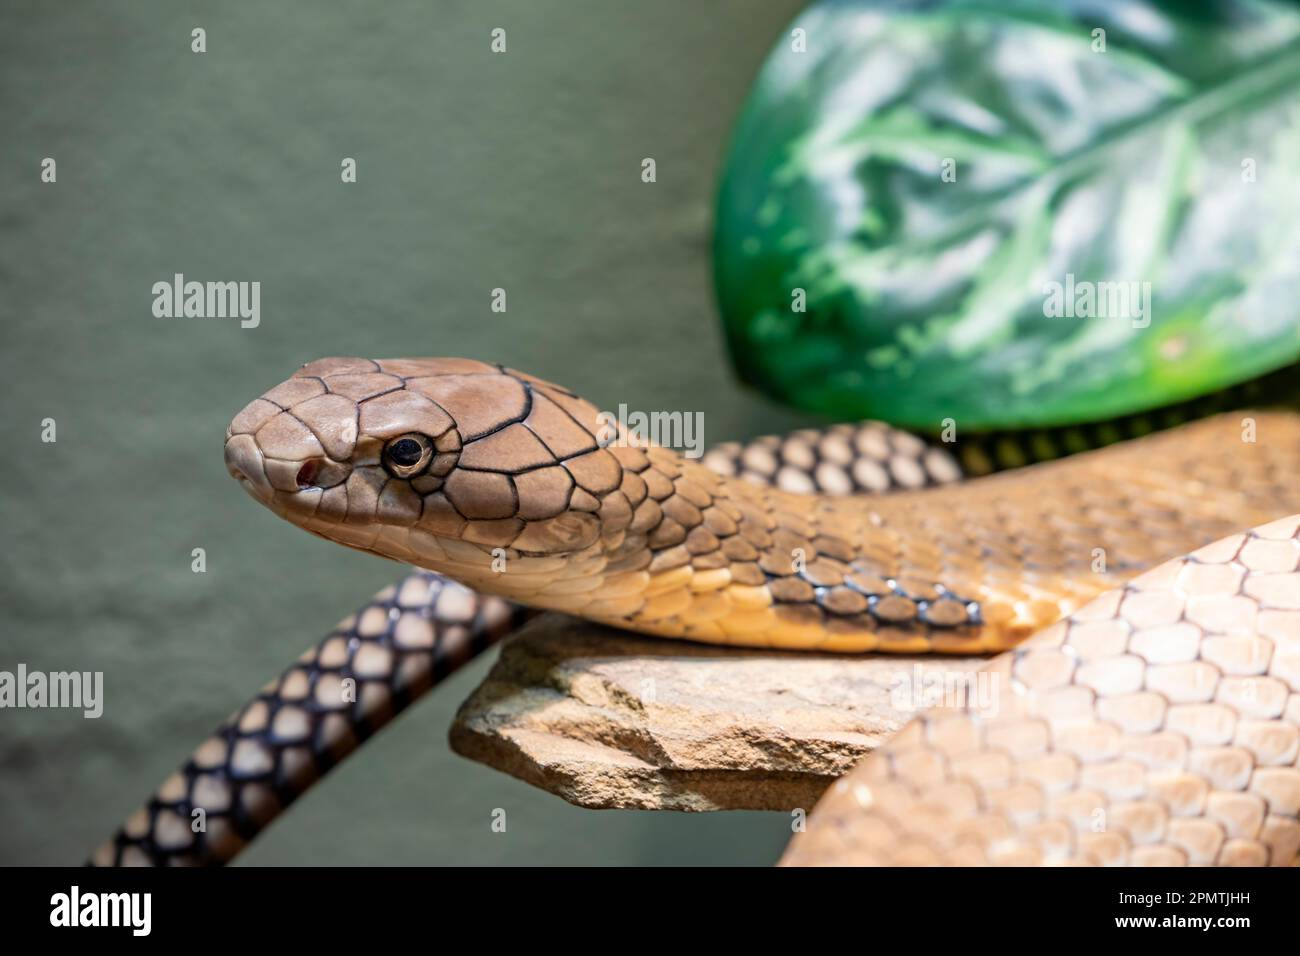 The king cobra (Ophiophagus hannah) is a large elapid endemic to forests from India through Southeast Asia. It is the world's longest venomous snake. Stock Photo